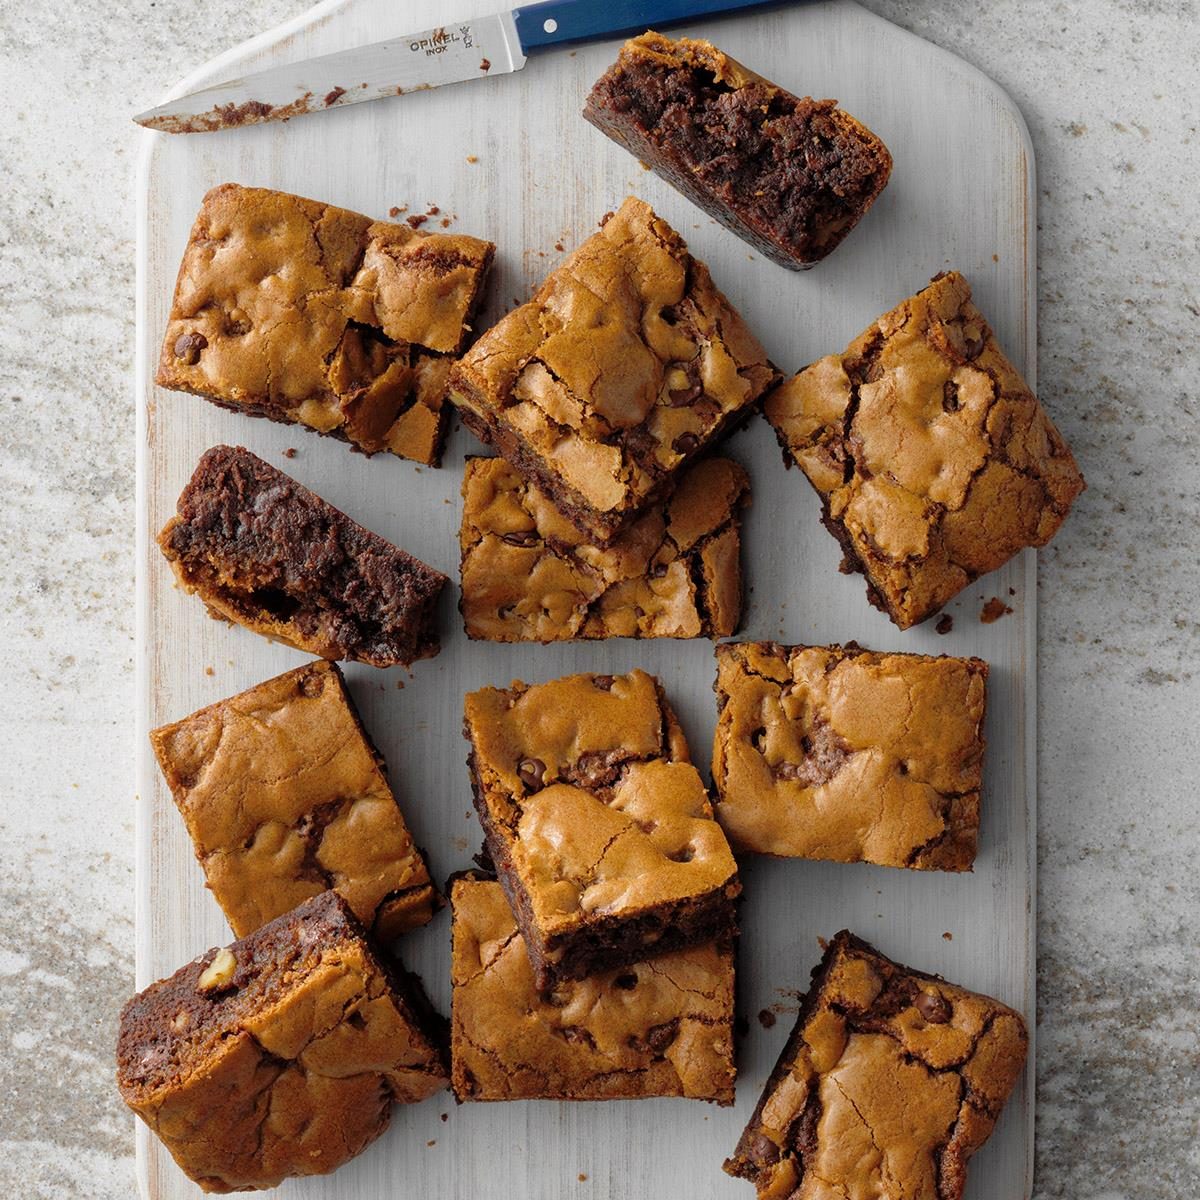 https://www.tasteofhome.com/wp-content/uploads/2019/03/Chocolate-Chip-Cookie-Brownies_EXPS_TOH.COM19_172348_E05_30_1b-1.jpg